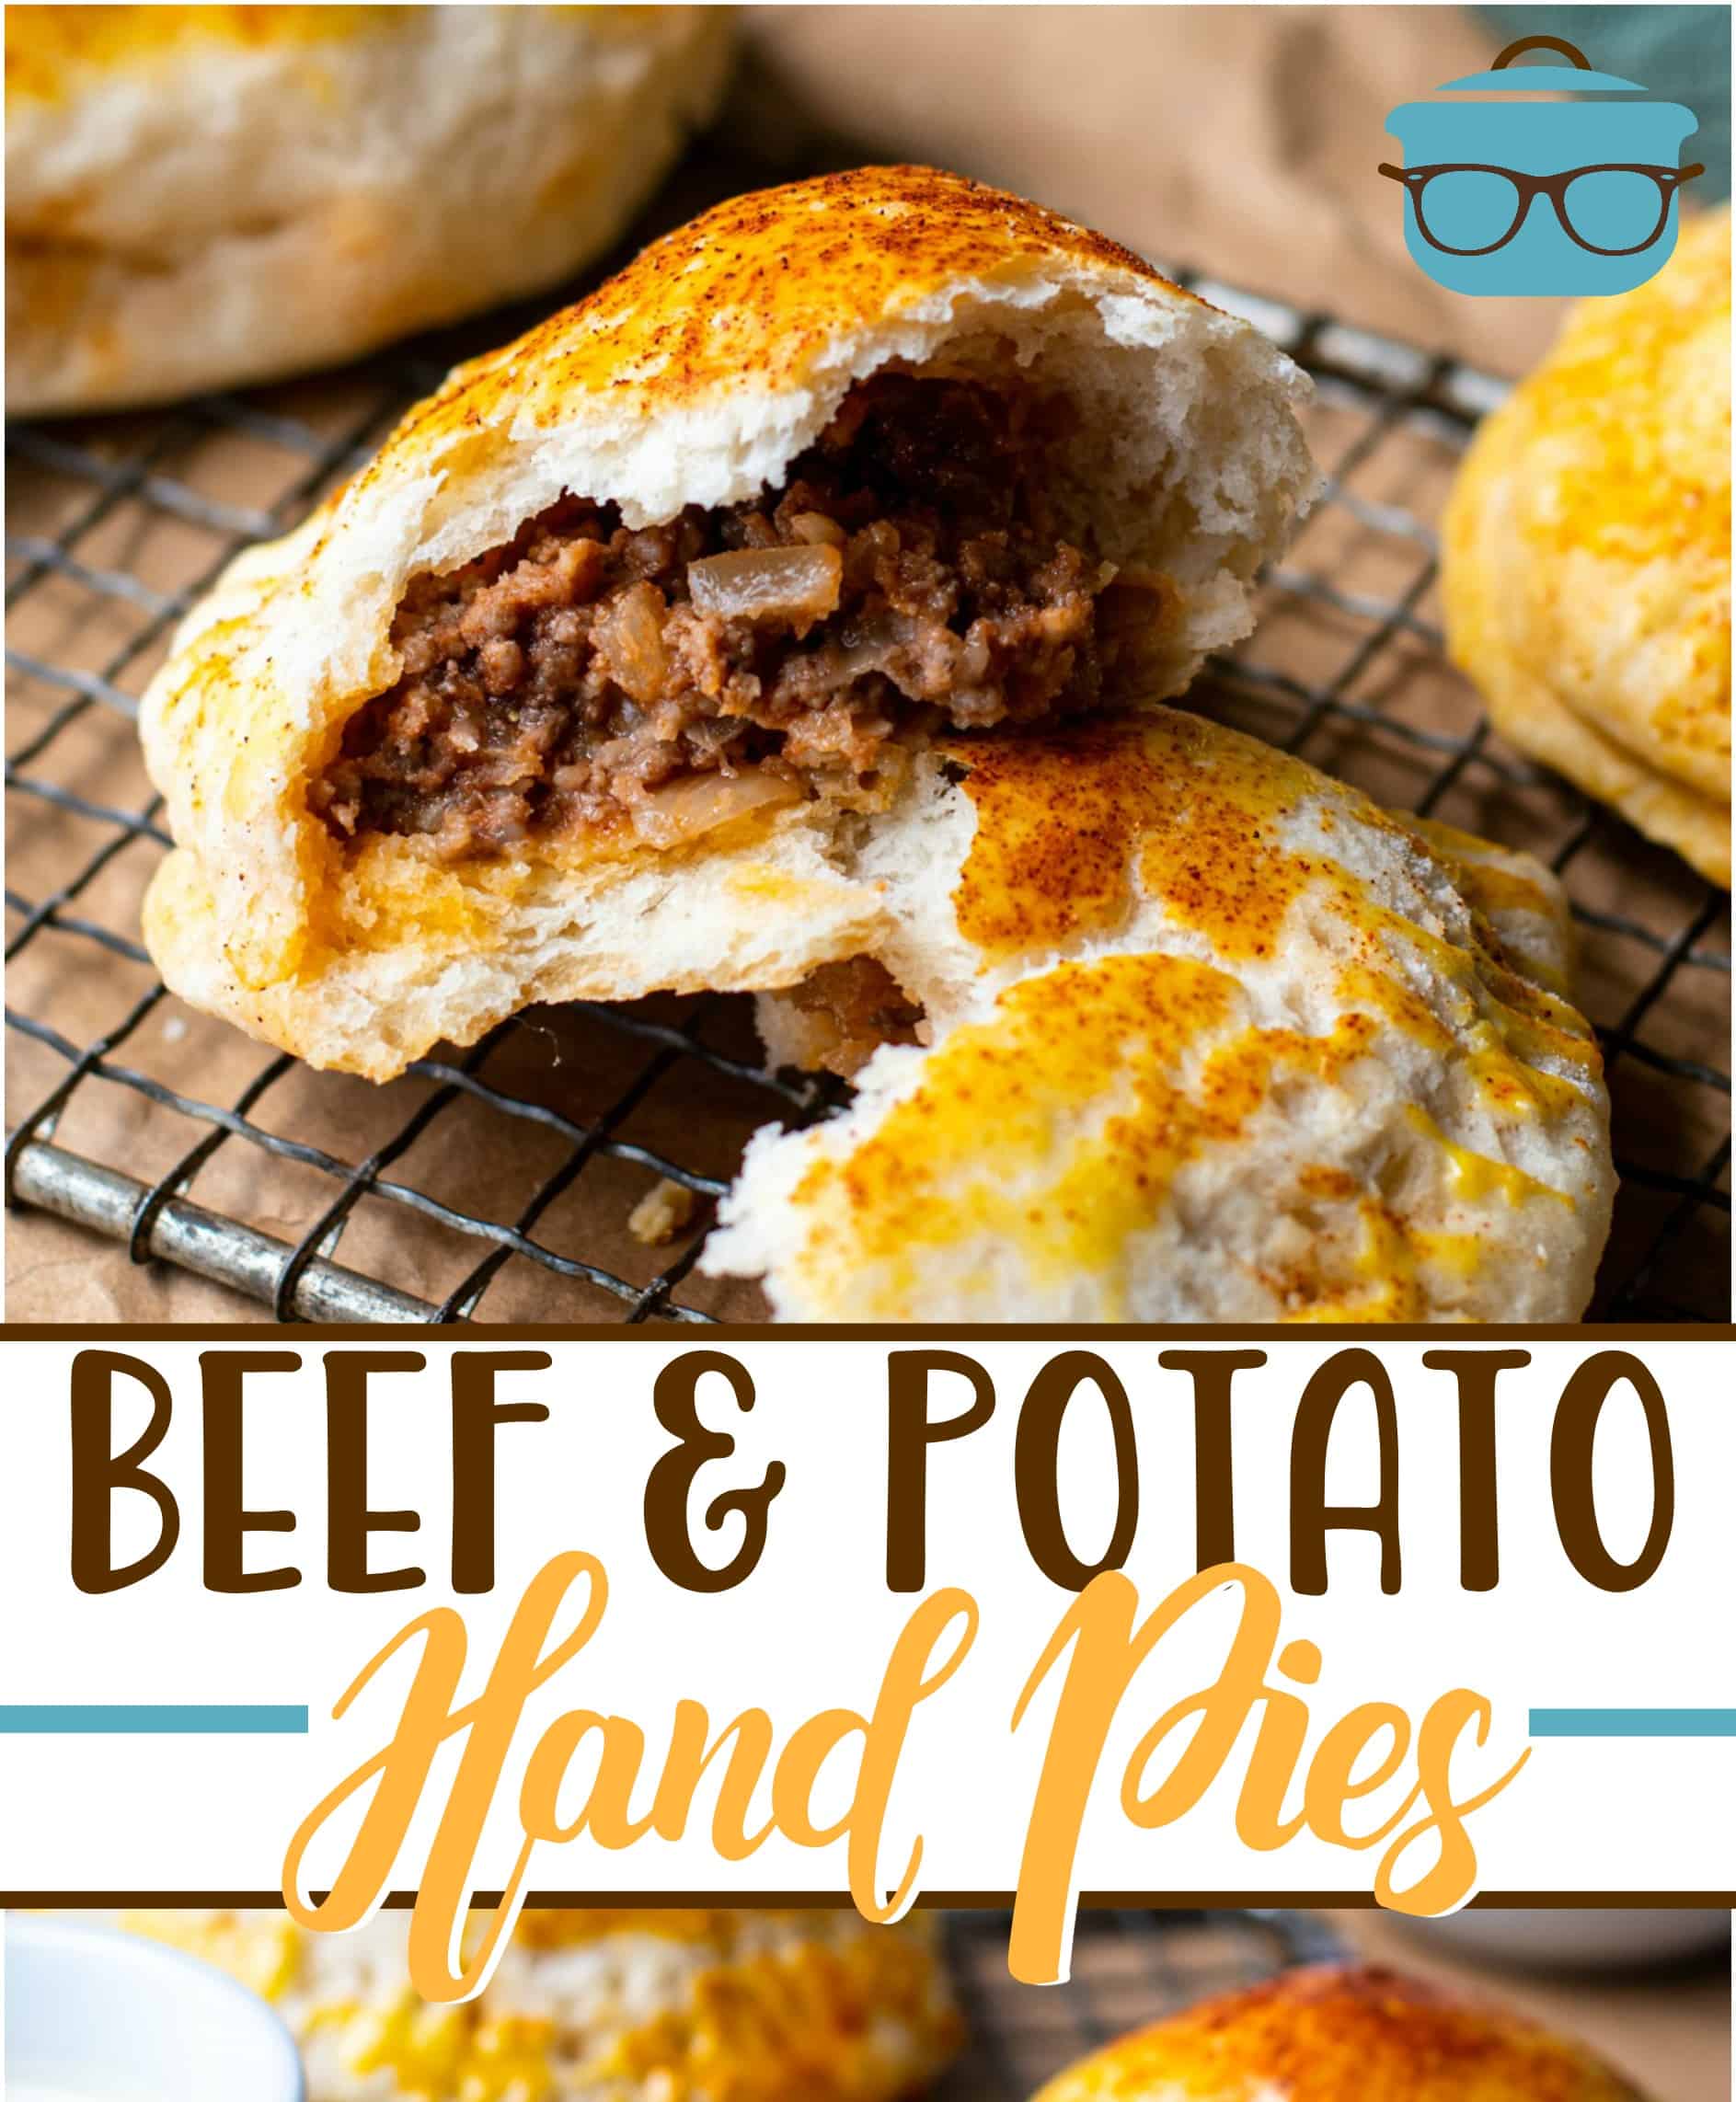 Beef and Potato Hand Pies recipe from The Country Cook, one hand pie split open to show cooked ground beef center.